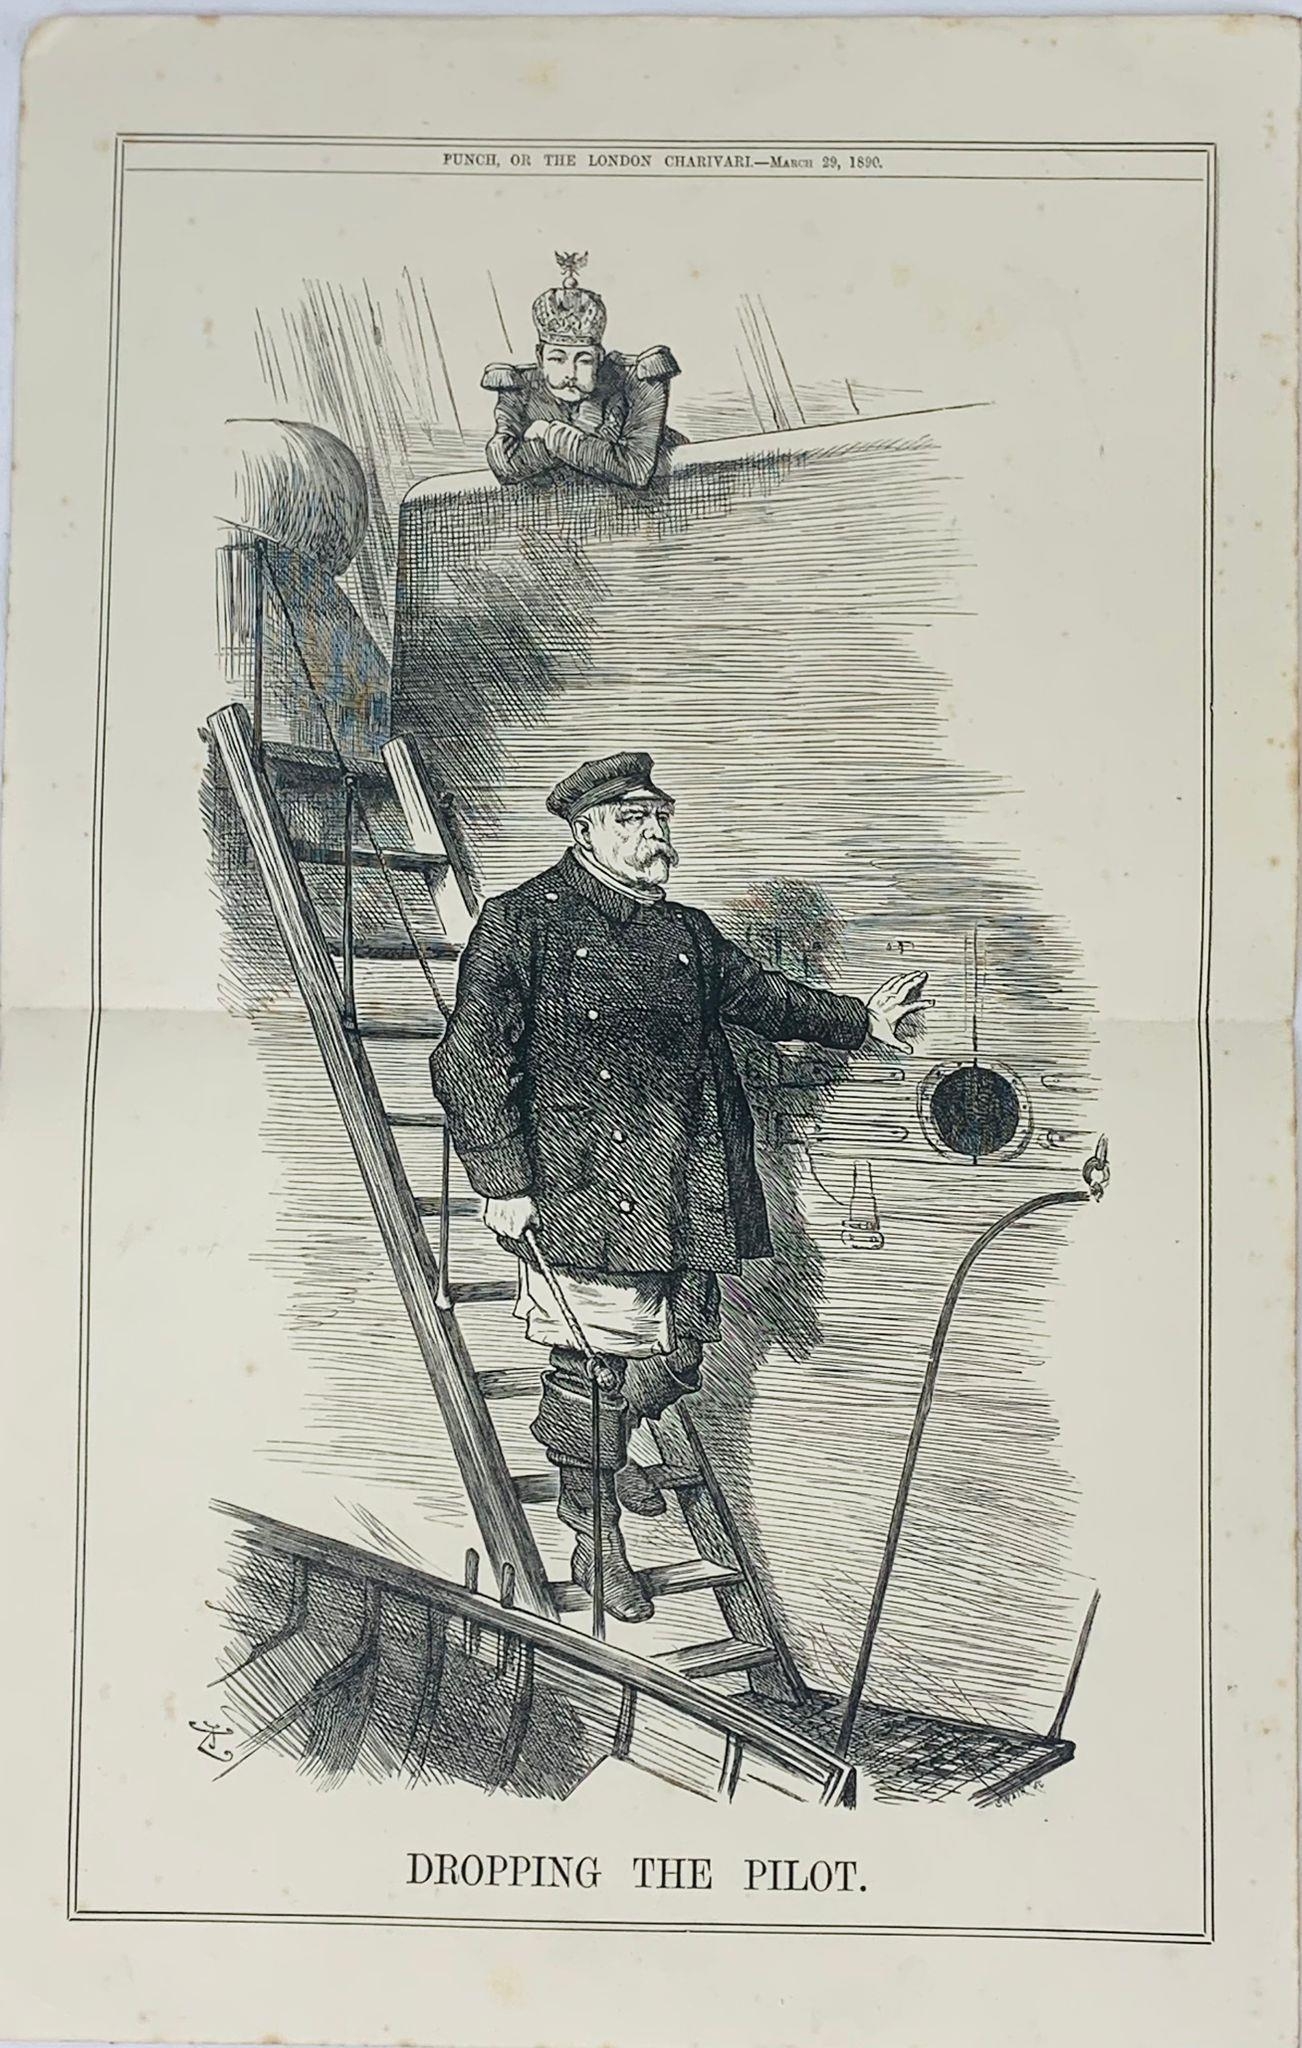 Four Antique Pieces of Original Punch Magazine Satire and Caricature. Including, Drop the Pilot - - Image 3 of 6